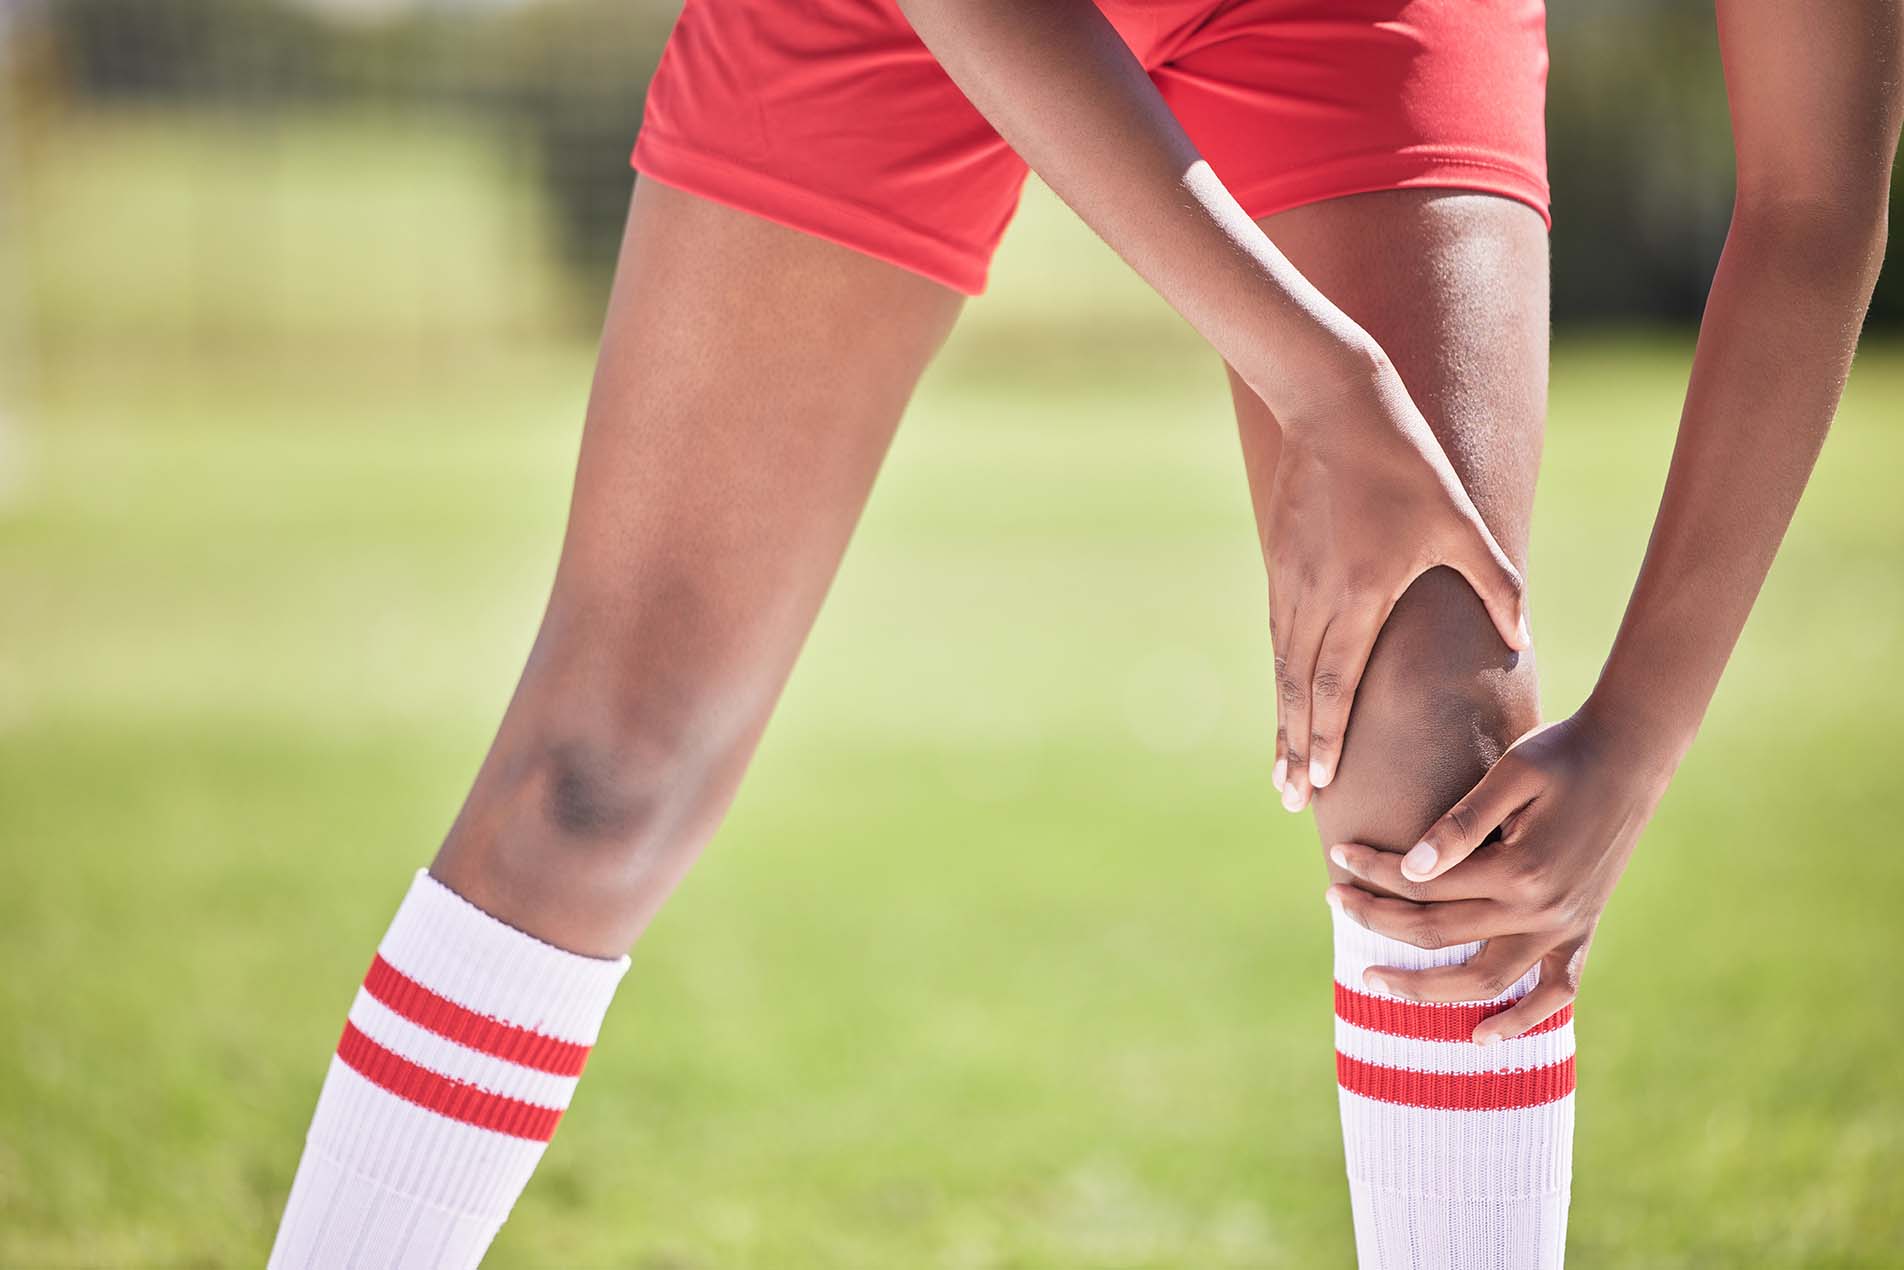 medical knee injury, football or sport player in pain with sore